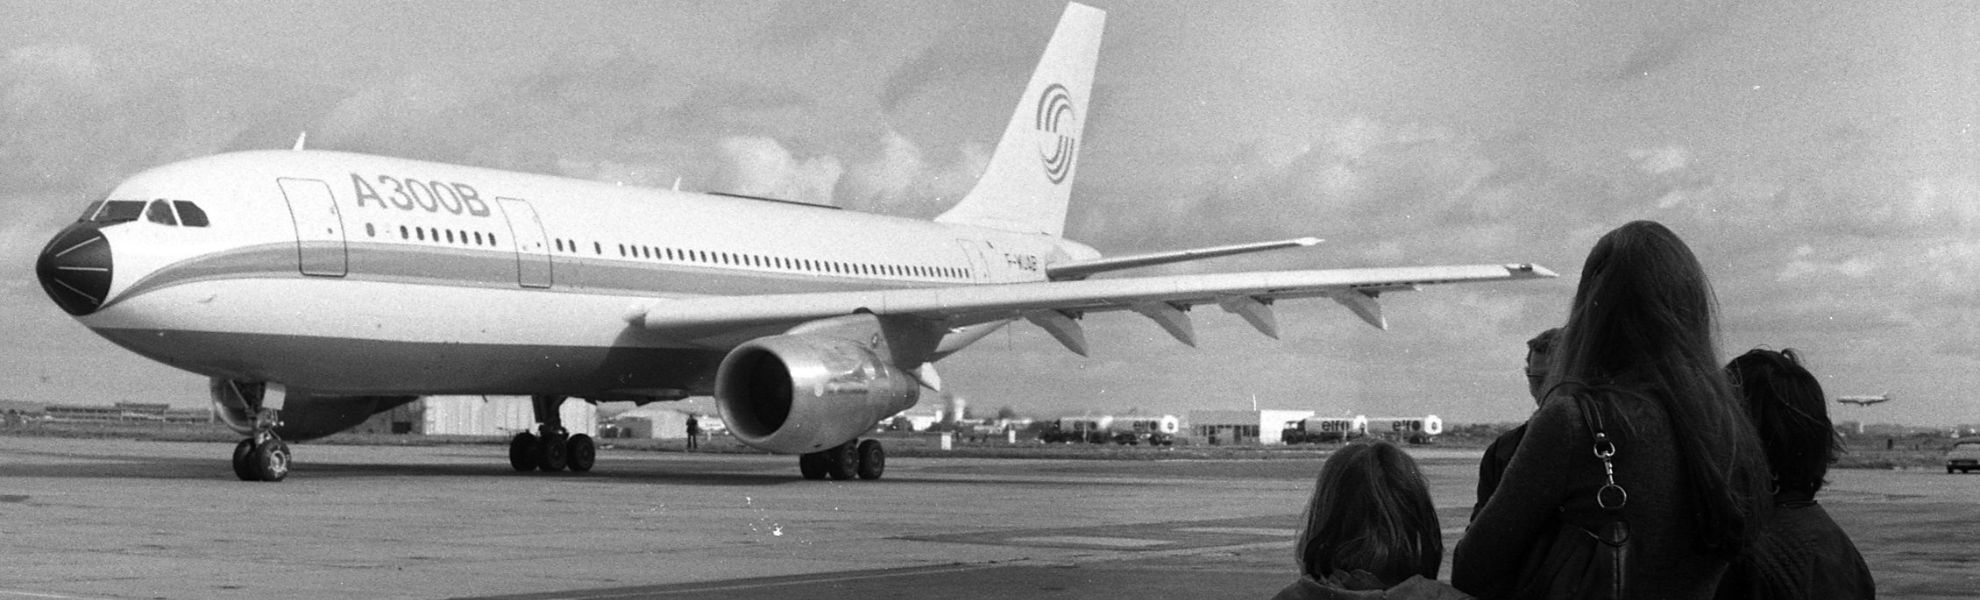 article-blog-electronie-airbus-1972